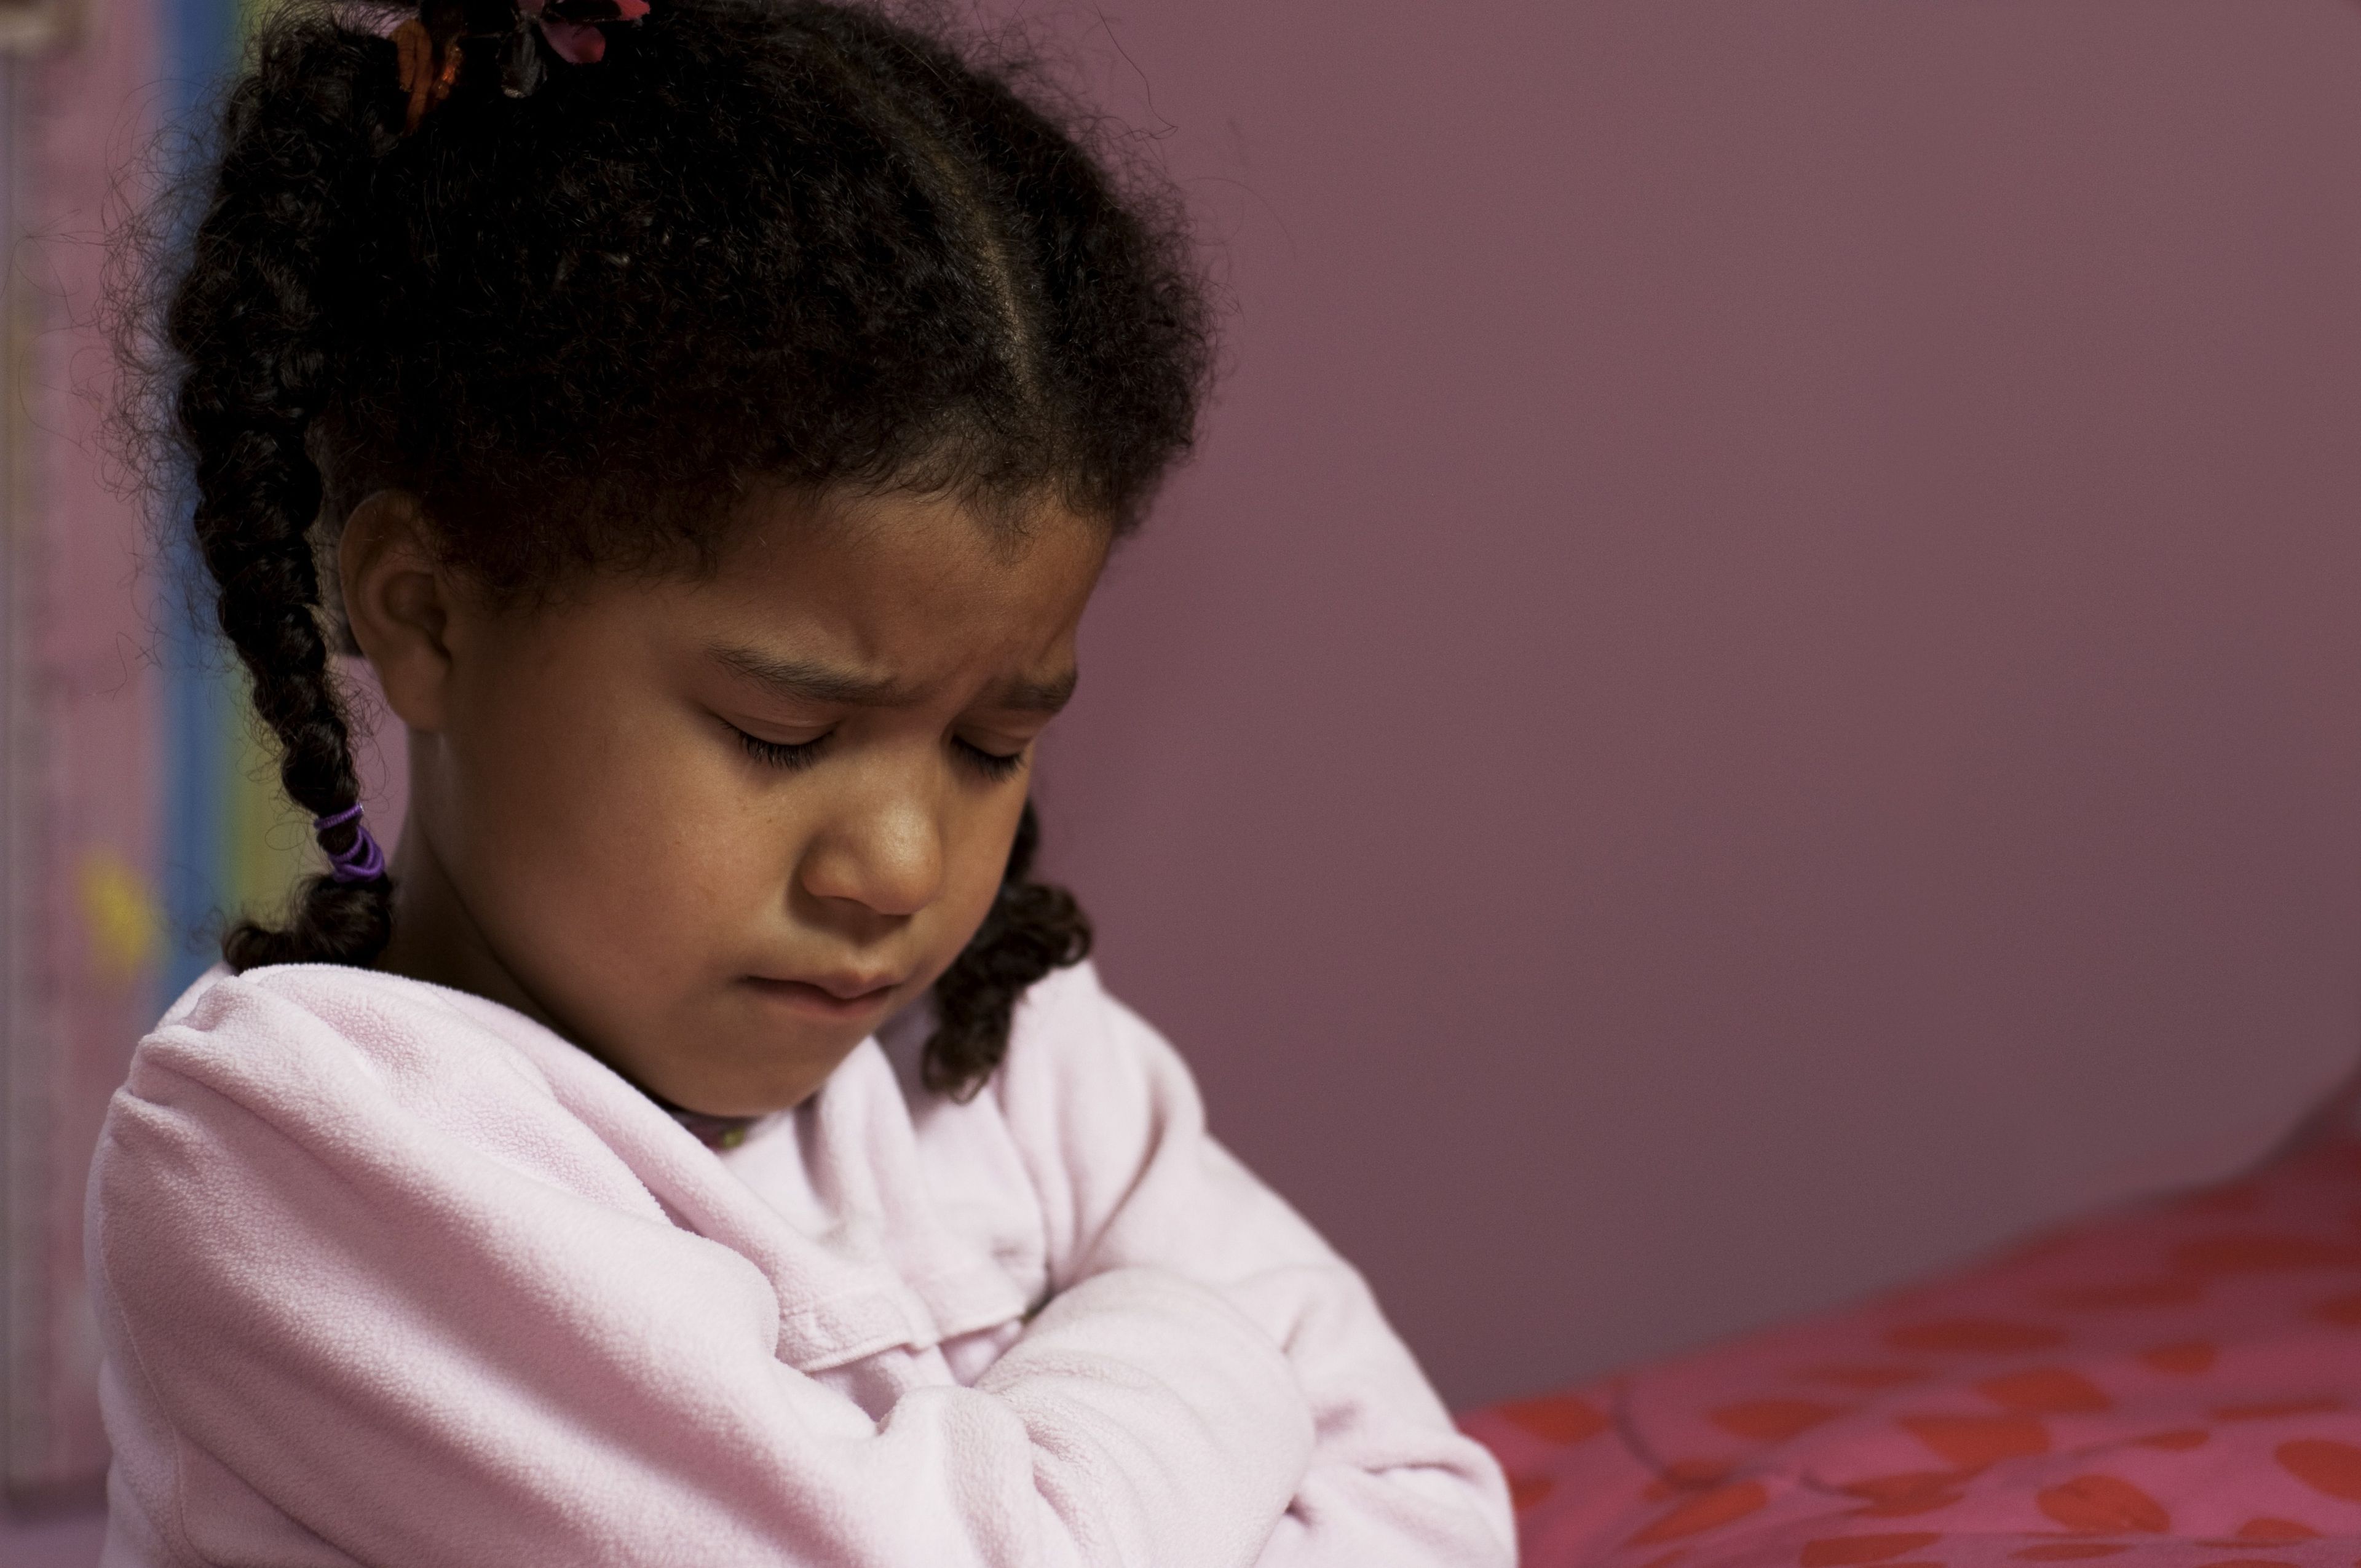 A young girl prays before she goes to bed.